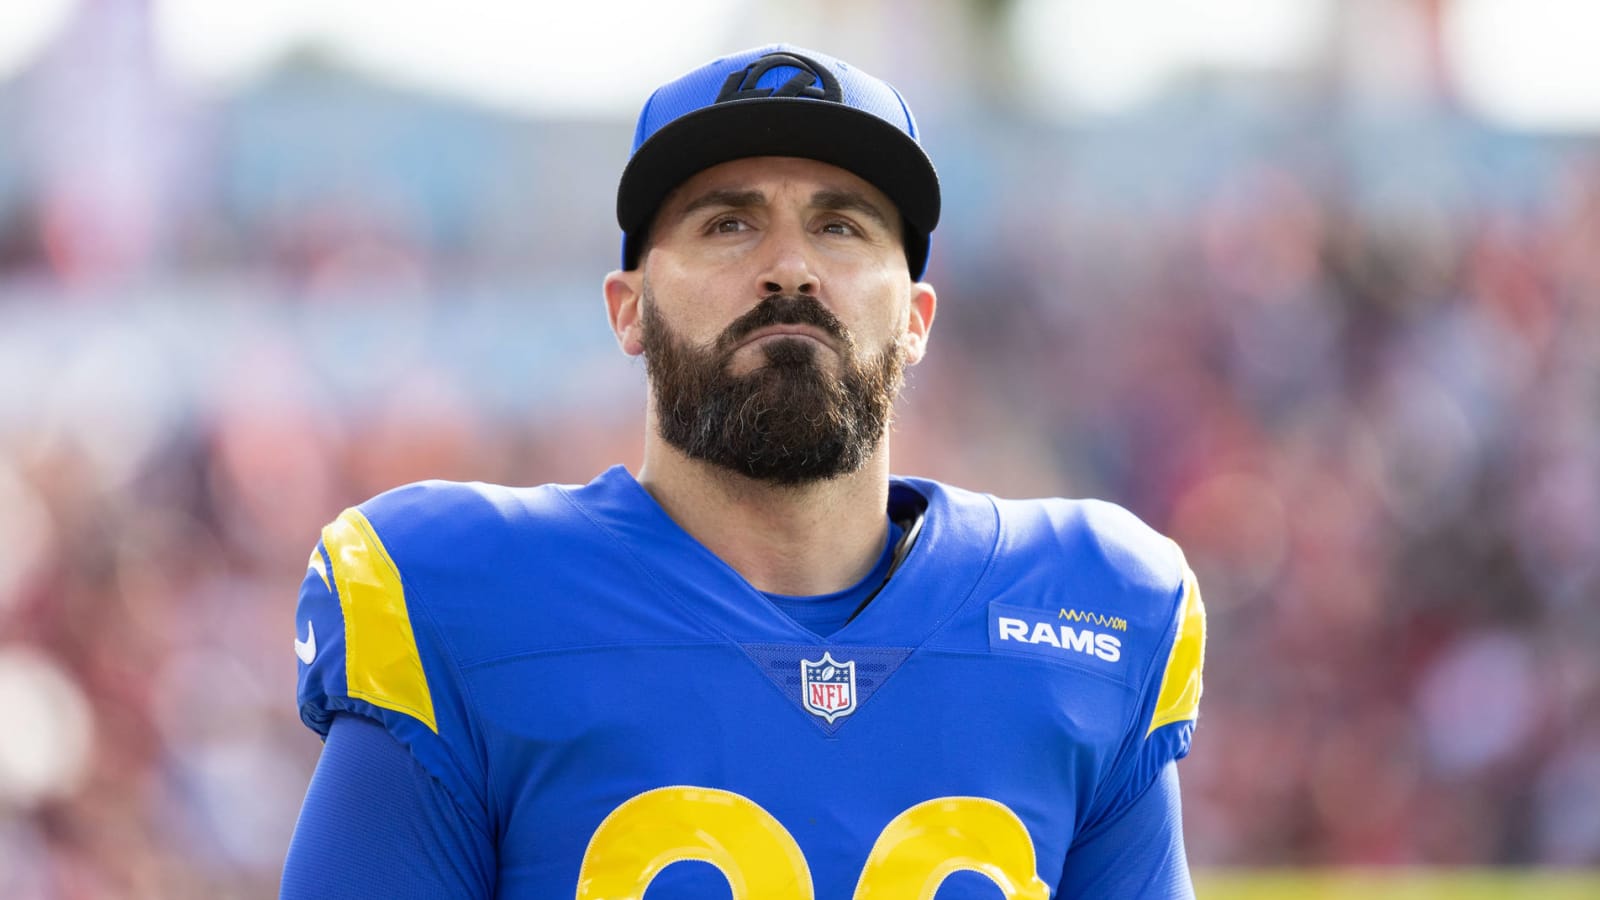 Eric Weddle expected to return to retirement after Super Bowl